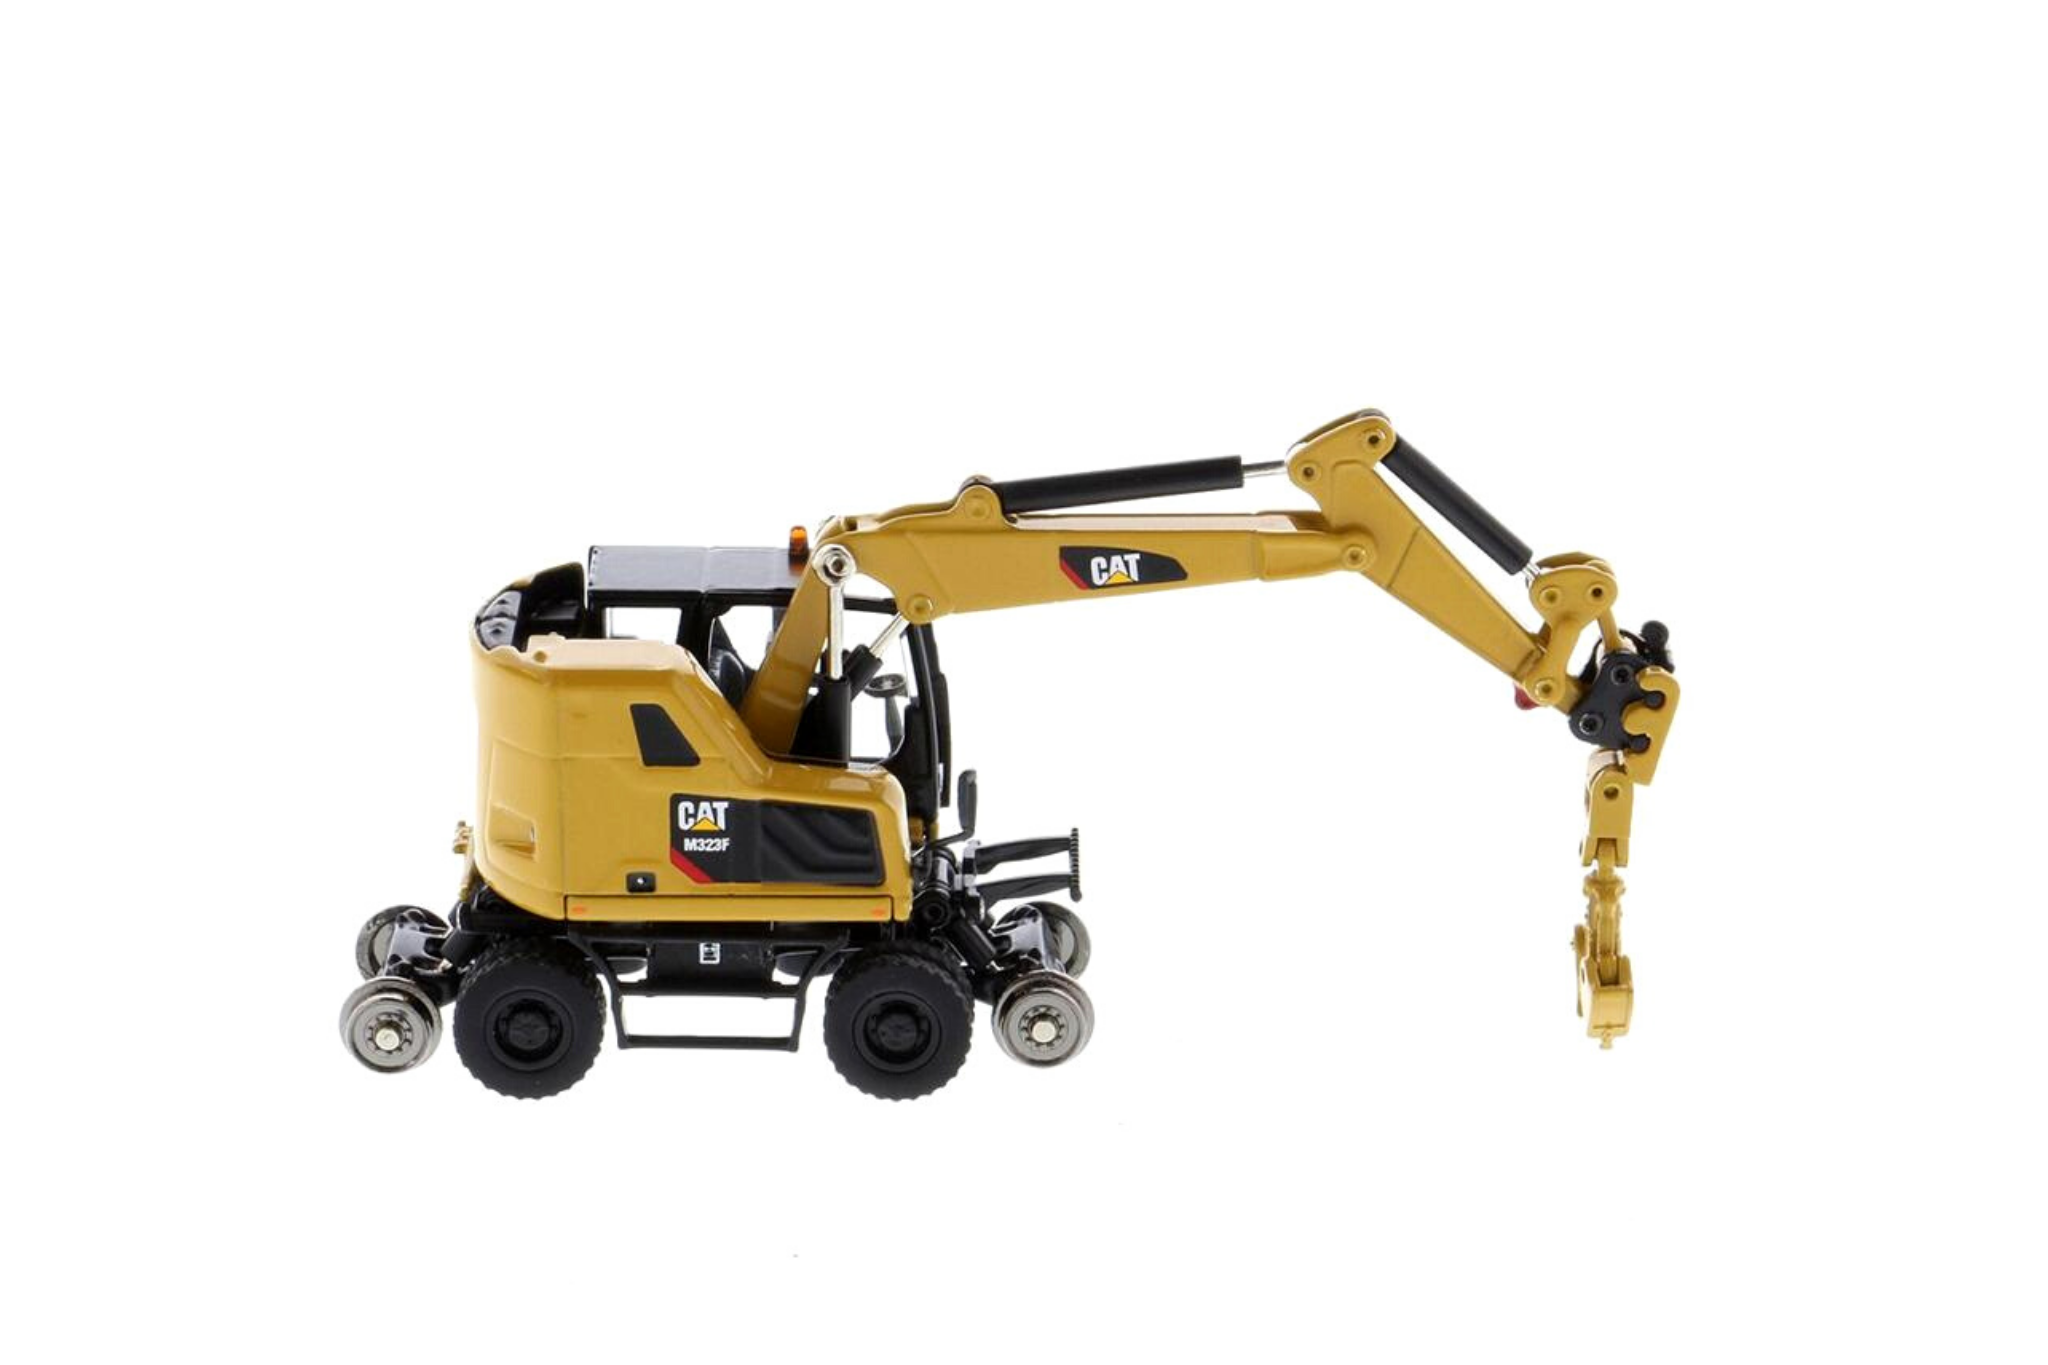 1:87 Cat® M323F Railroad Wheeled Excavator, Cat® Yellow with 3 